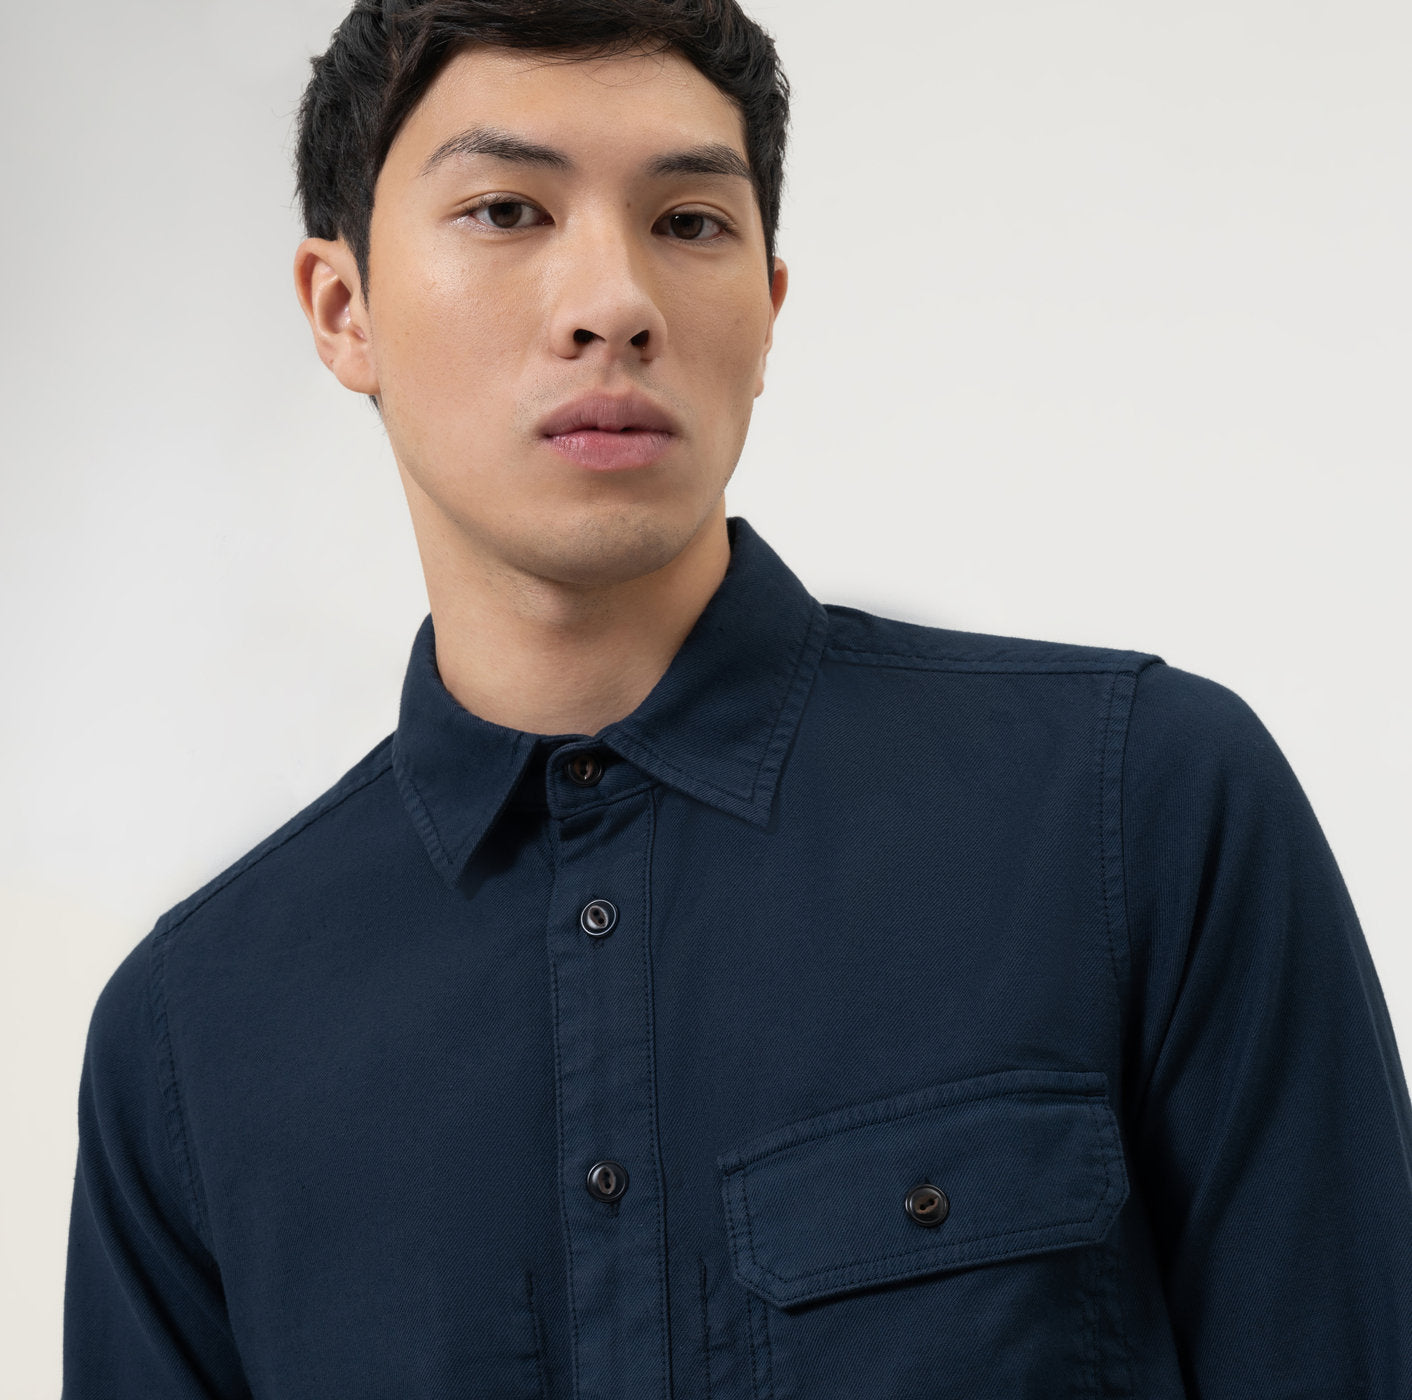 Overshirt - Navy - Modern fit - Casual